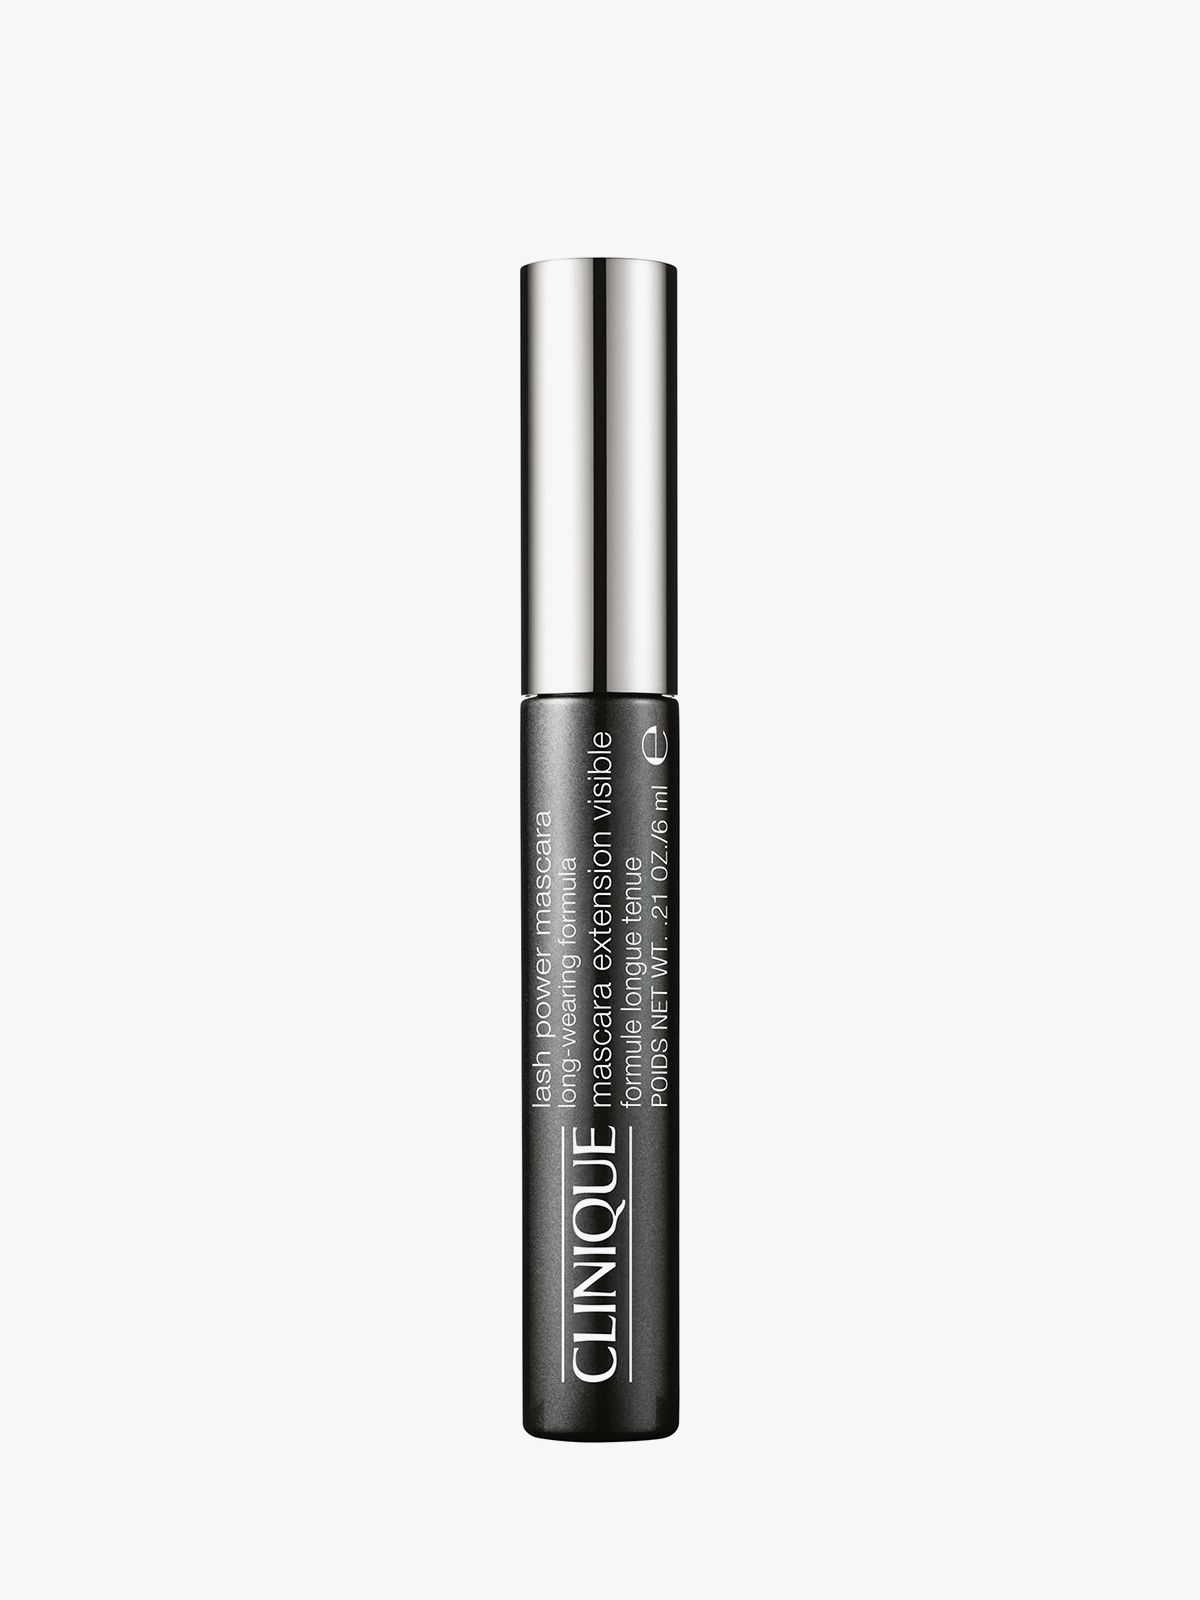 Chanel: Noir Allure All-In-One Mascara: Volume, Length, Curl And Definition, 10 Noir